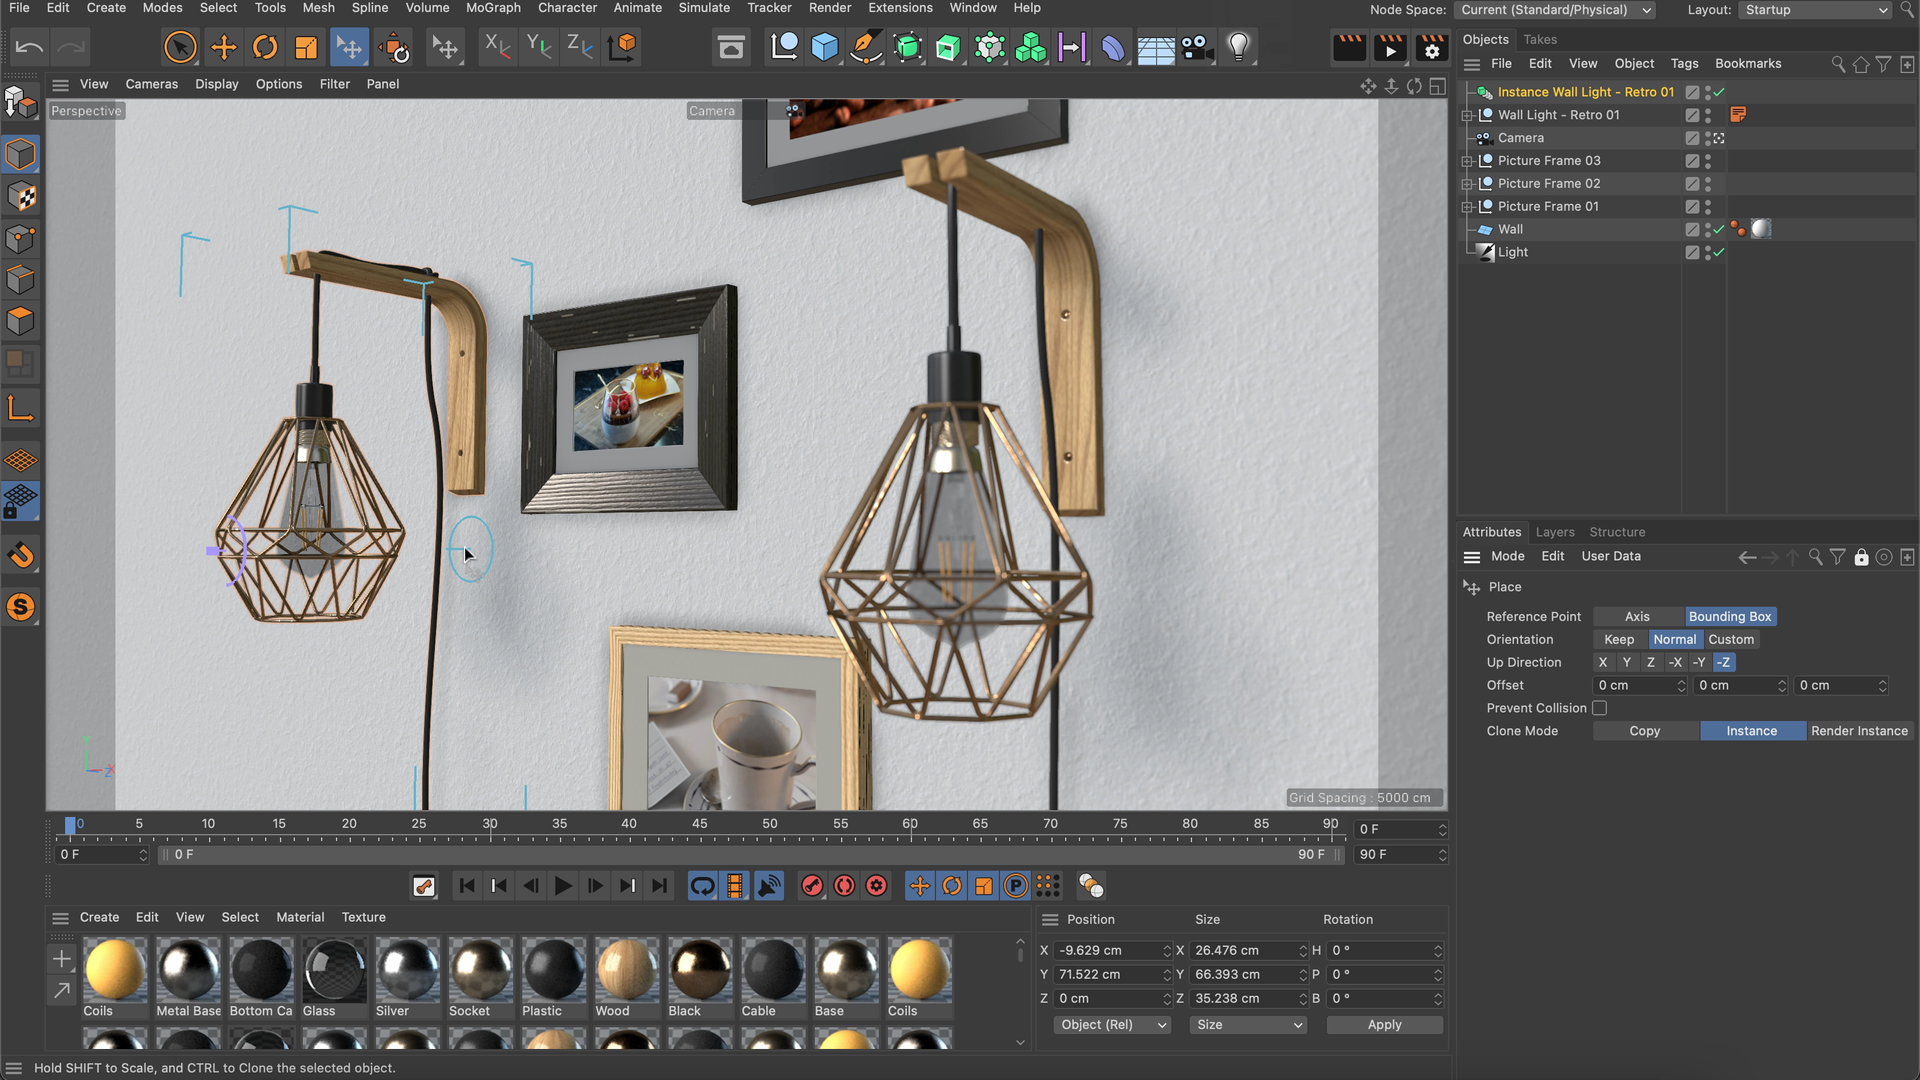 Placement Tools set the stage for creativity with intuitive and powerful tools for placing objects within a scene.